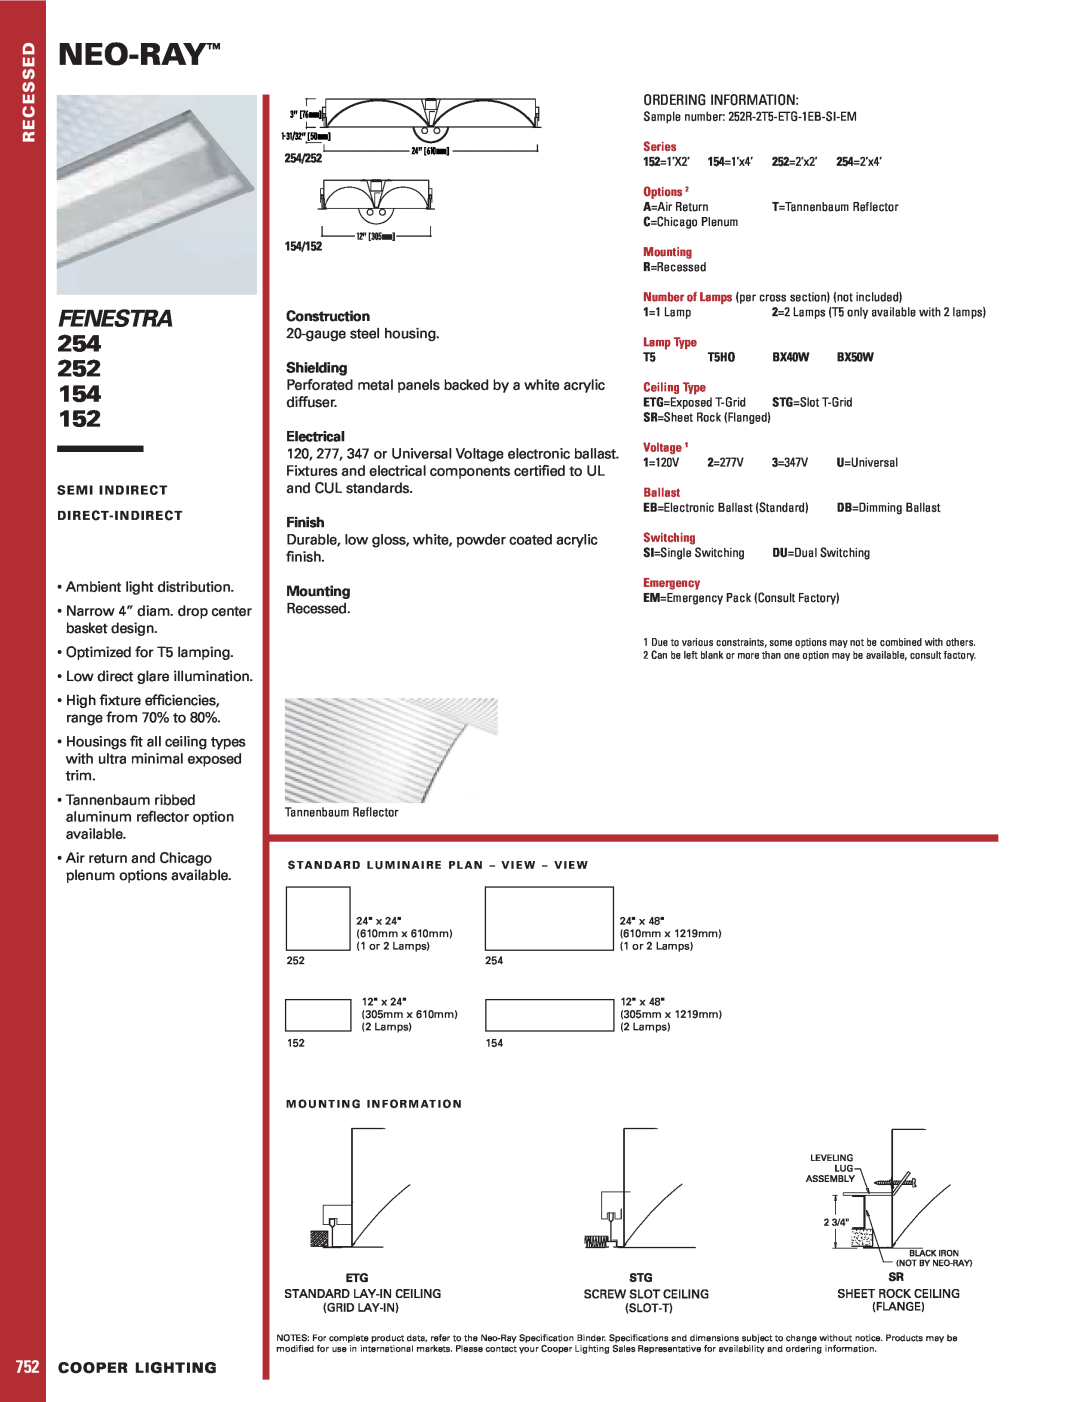 Cooper Lighting 752 specifications Neo-Ray, Fenestra, Recessed, Construction, Shielding, Electrical, Finish, Mounting 